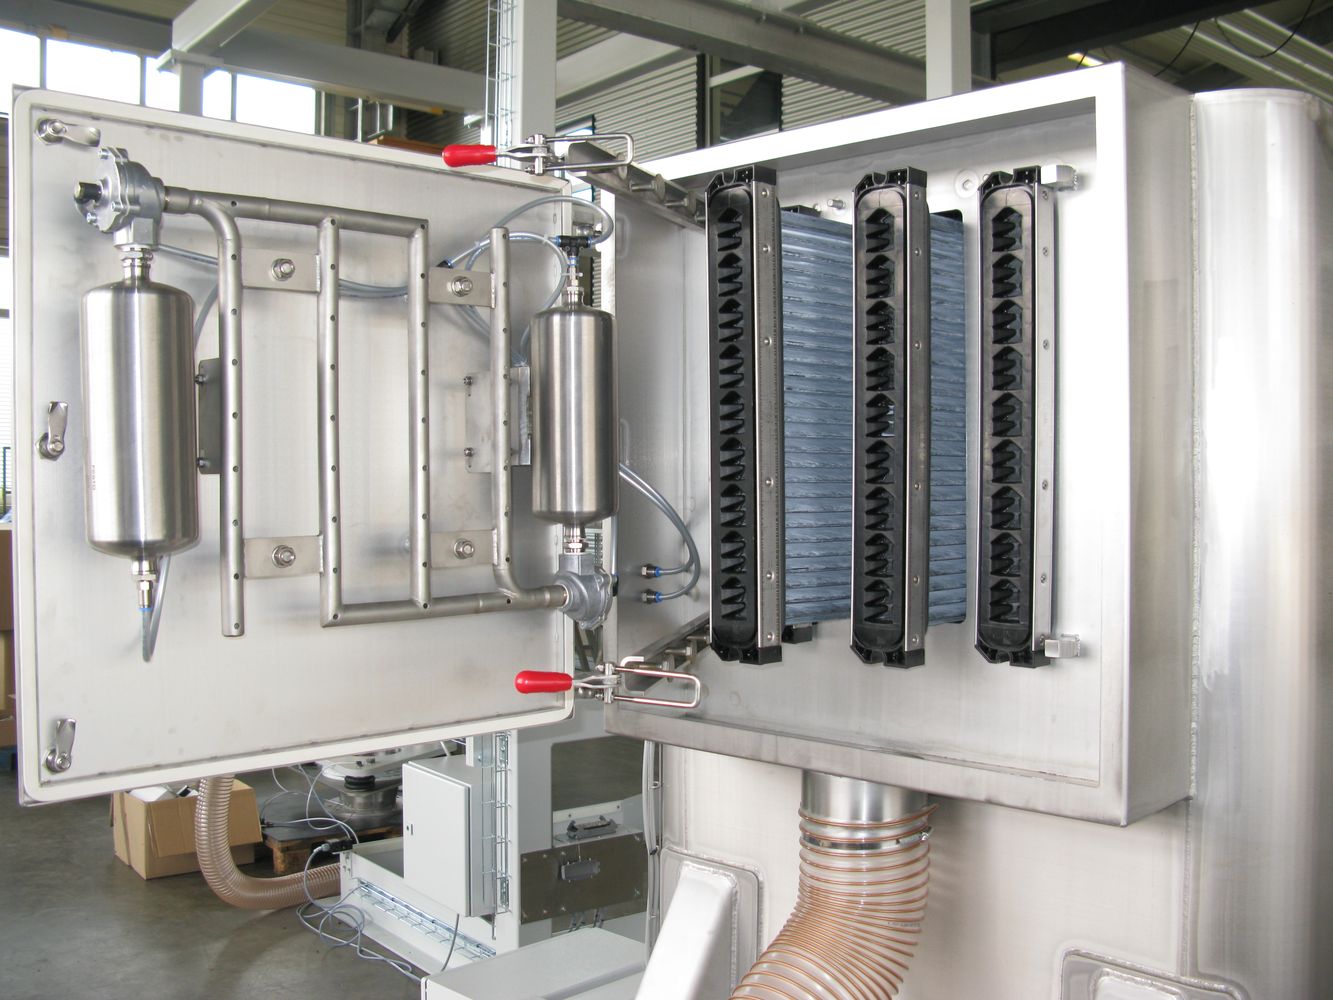 Stainless steel HECHT filtration system with multiple filter blocks in an open cabinet, featuring cylindrical filters and accordion-like flexible tubes. The system is designed for high-efficiency filtration with easy access for maintenance and cleaning in an industrial setting.